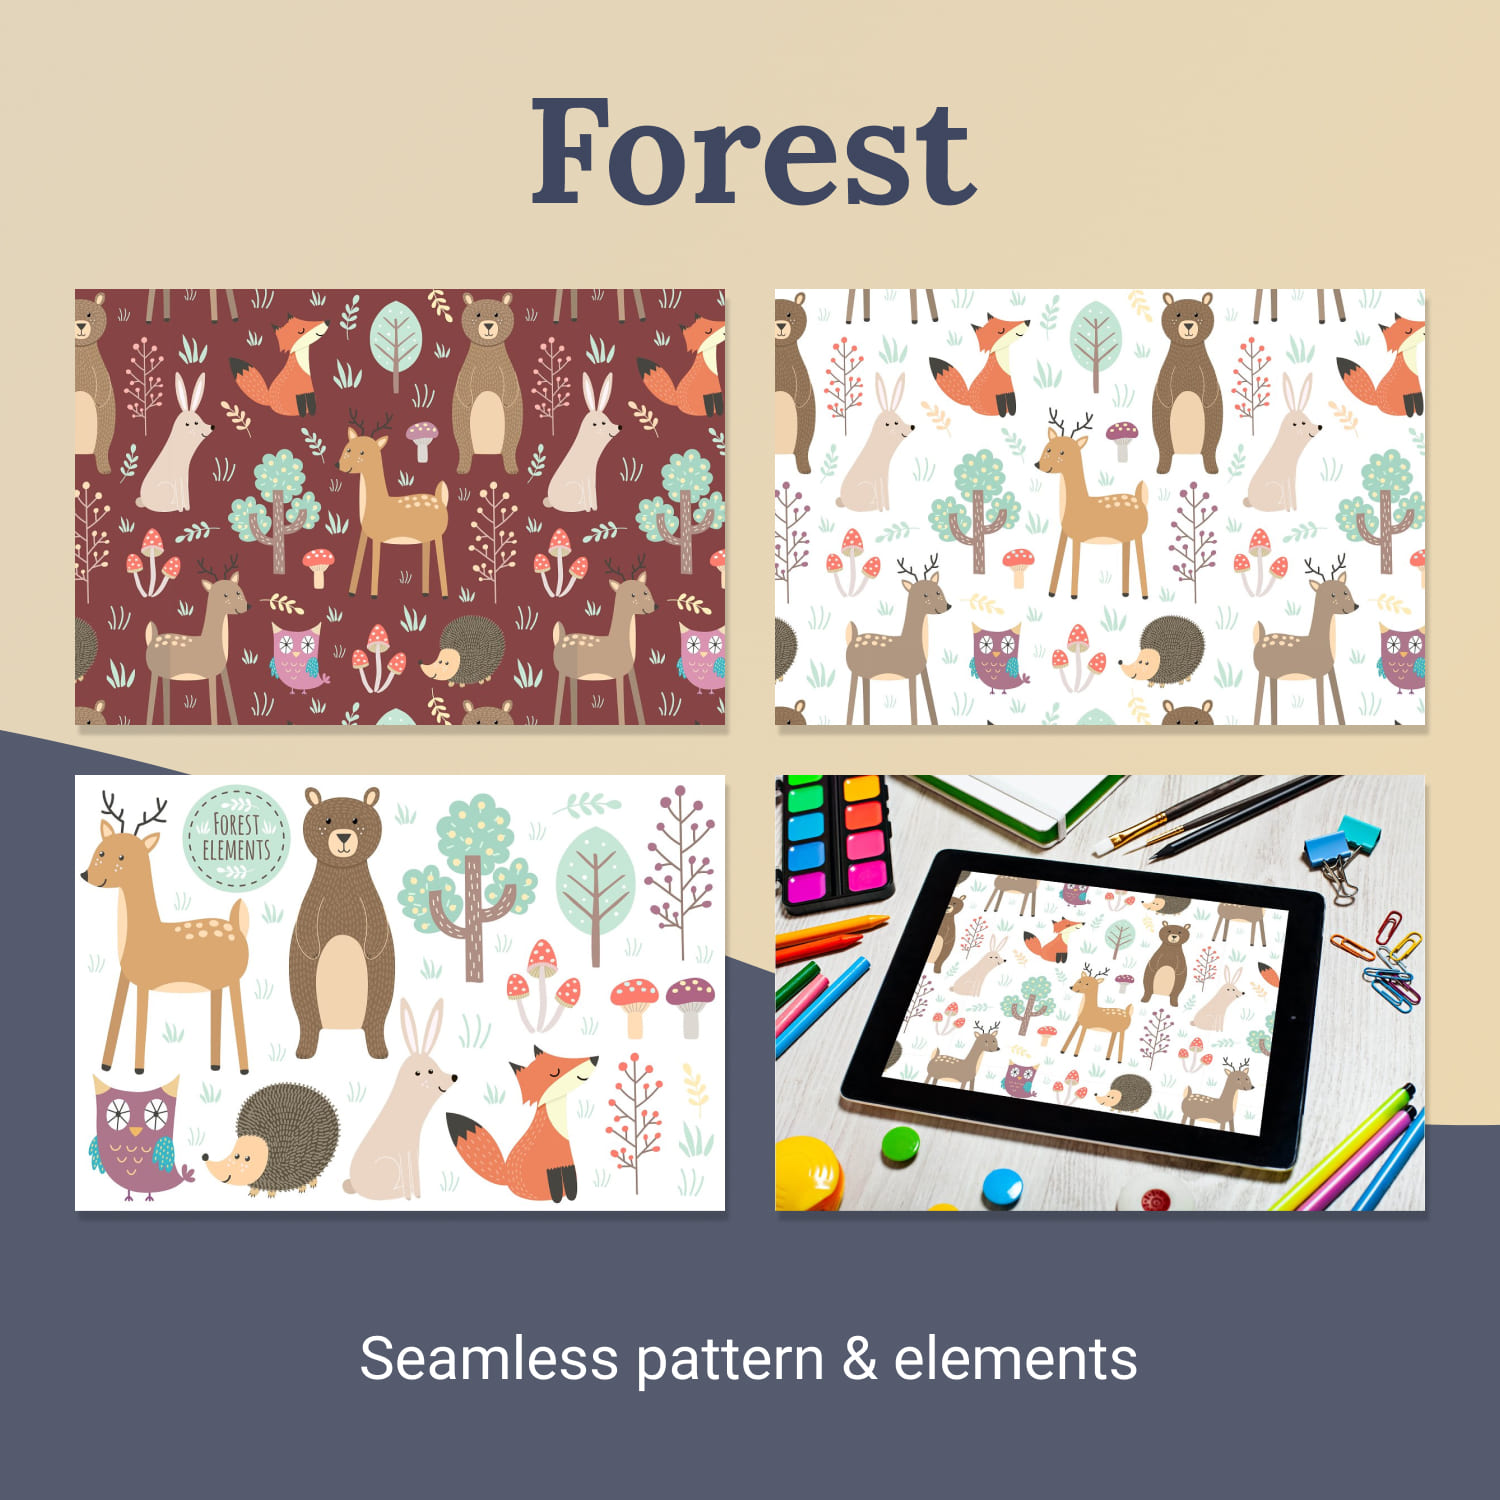 Forest: seamless pattern & elements.